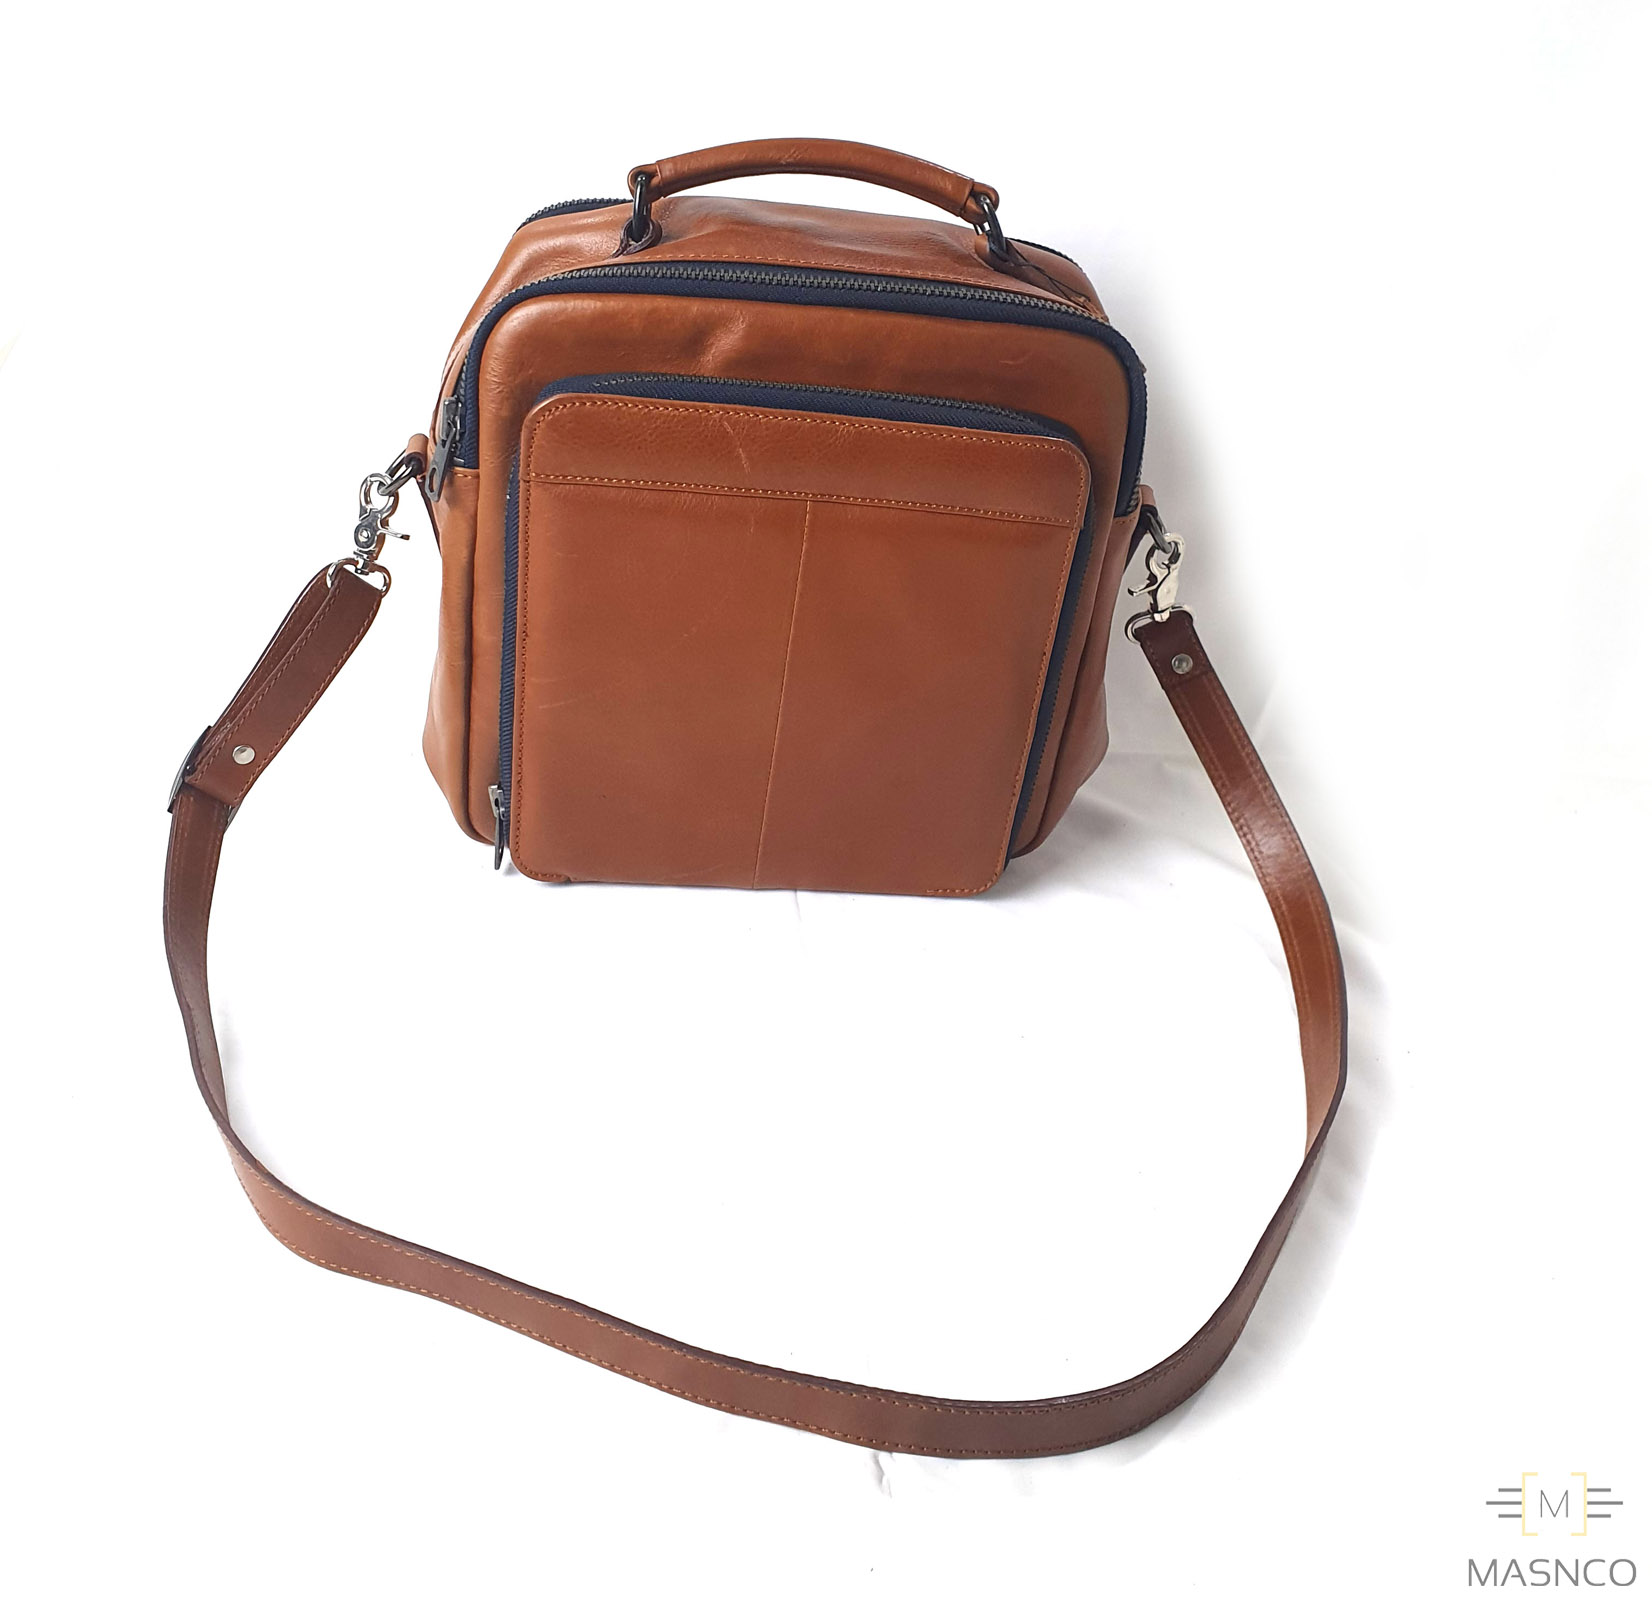 GENUINE LEATHER TRAVELERS BAGS